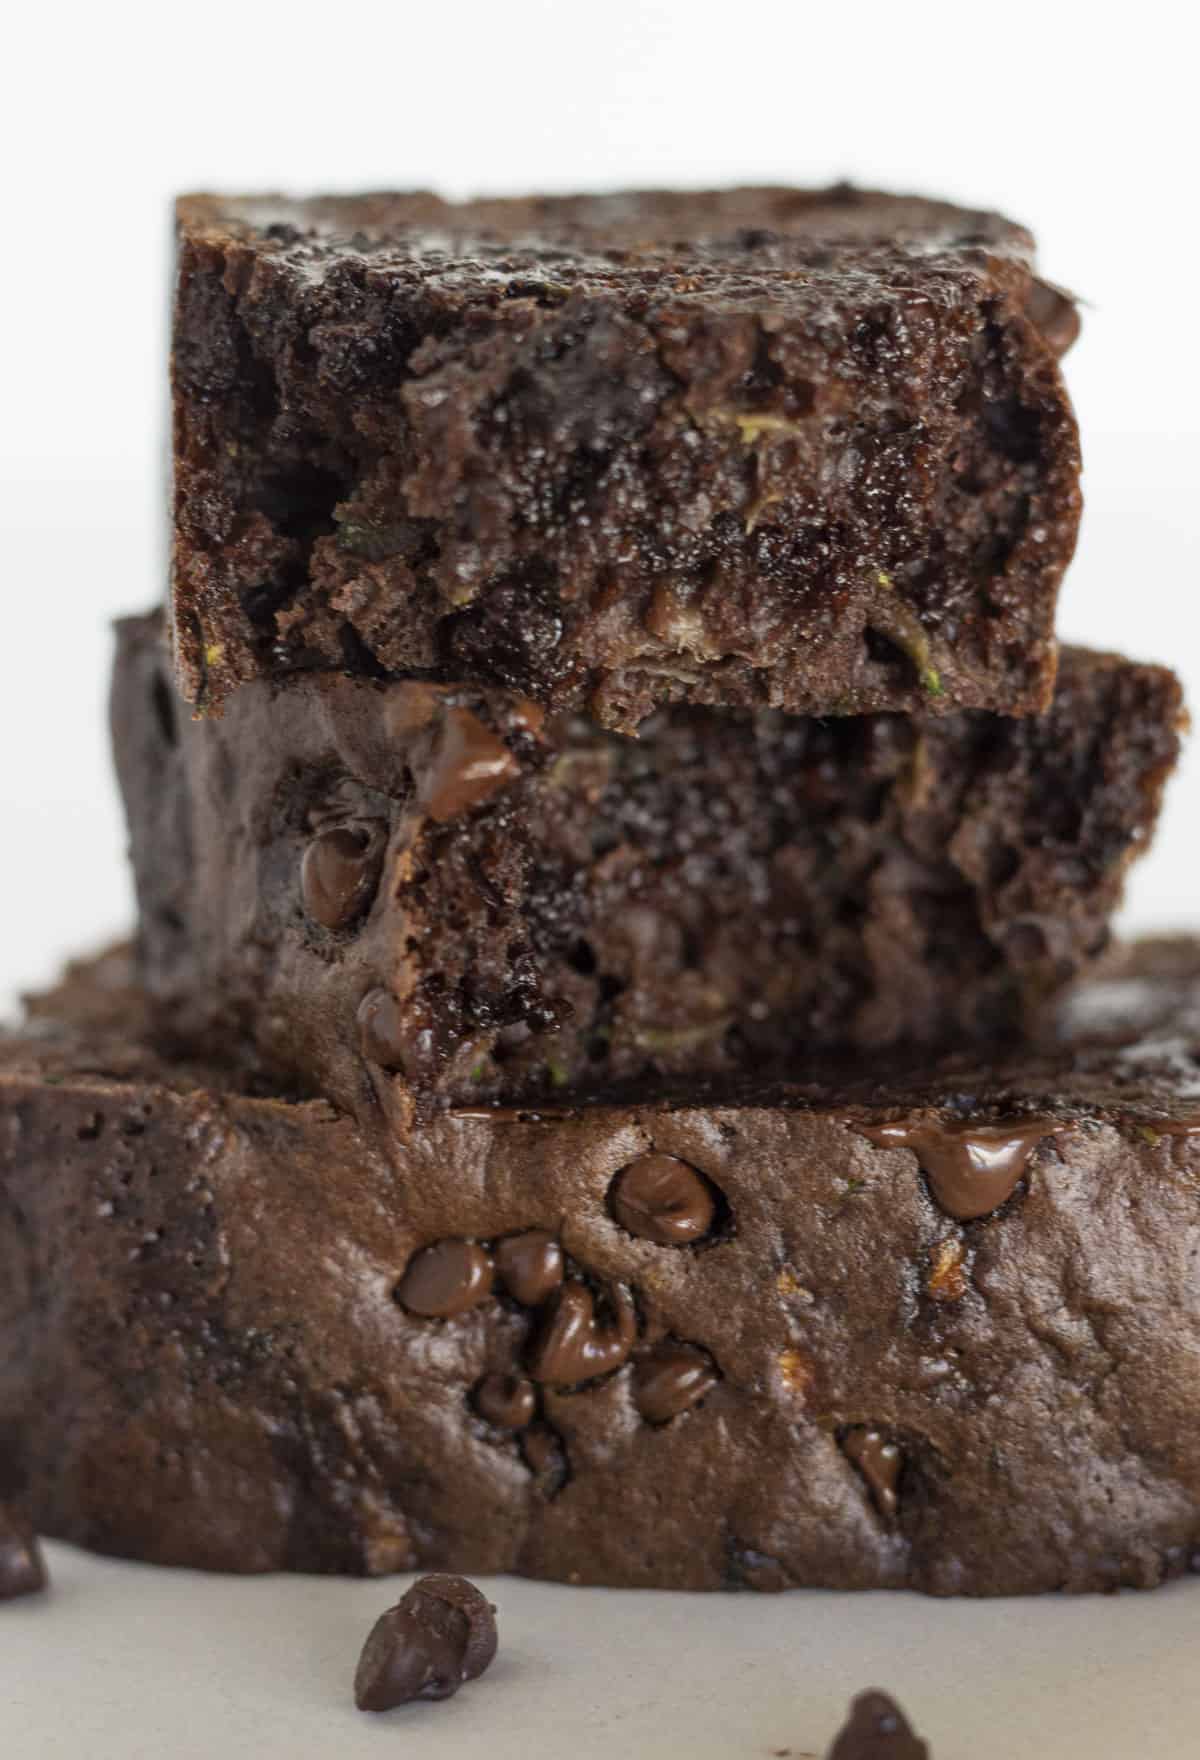 Two pieces of double chocolate zucchini bread stacked on each other.